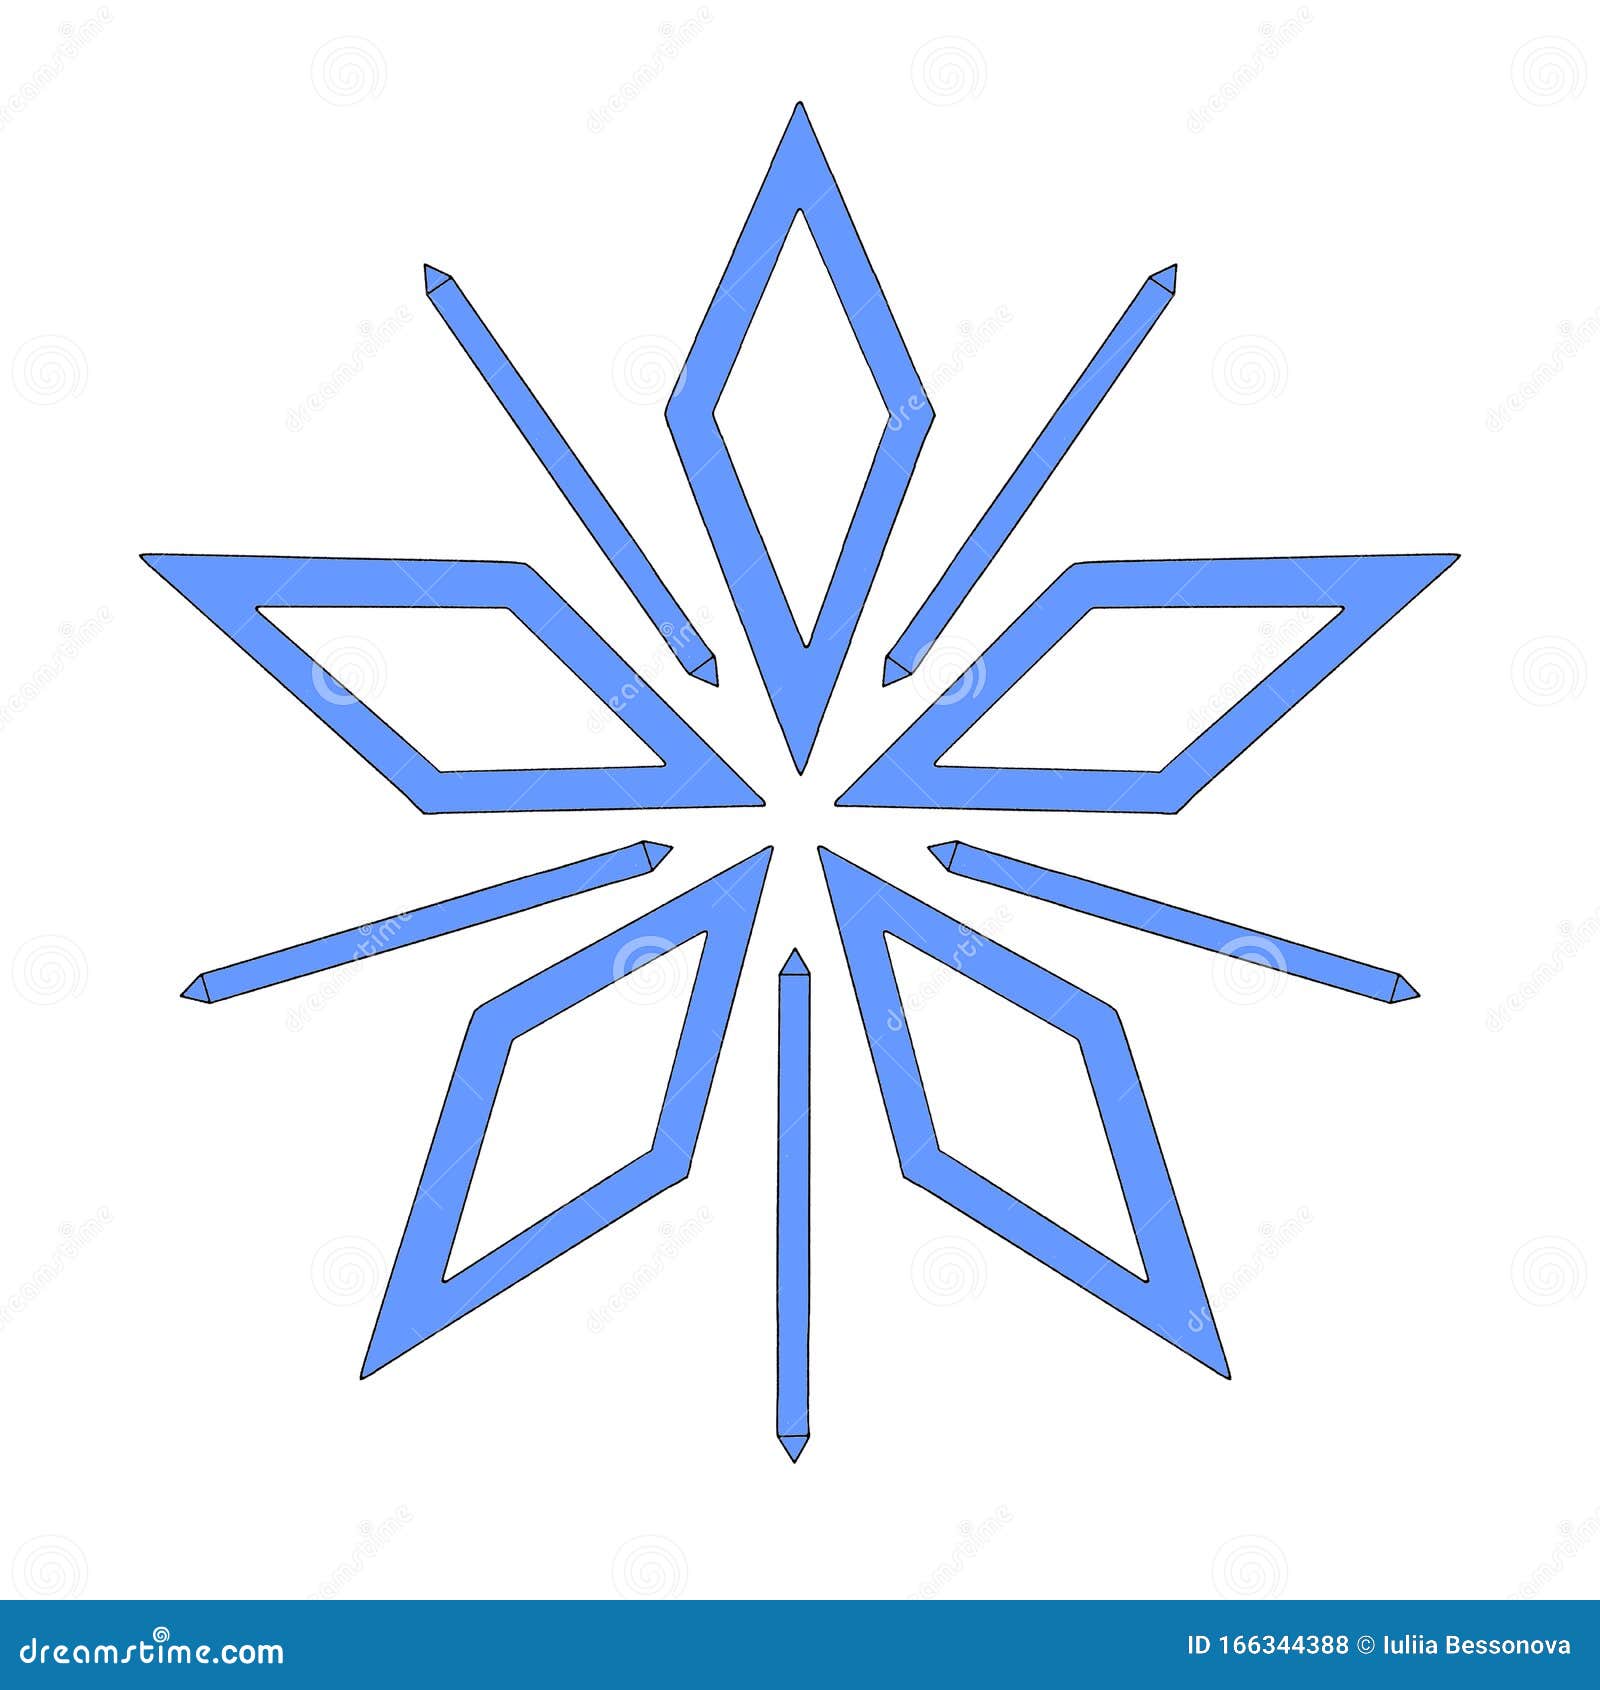 Snowflake, the symbol of winter: different sizes, infinite shapes -  Chalkdust